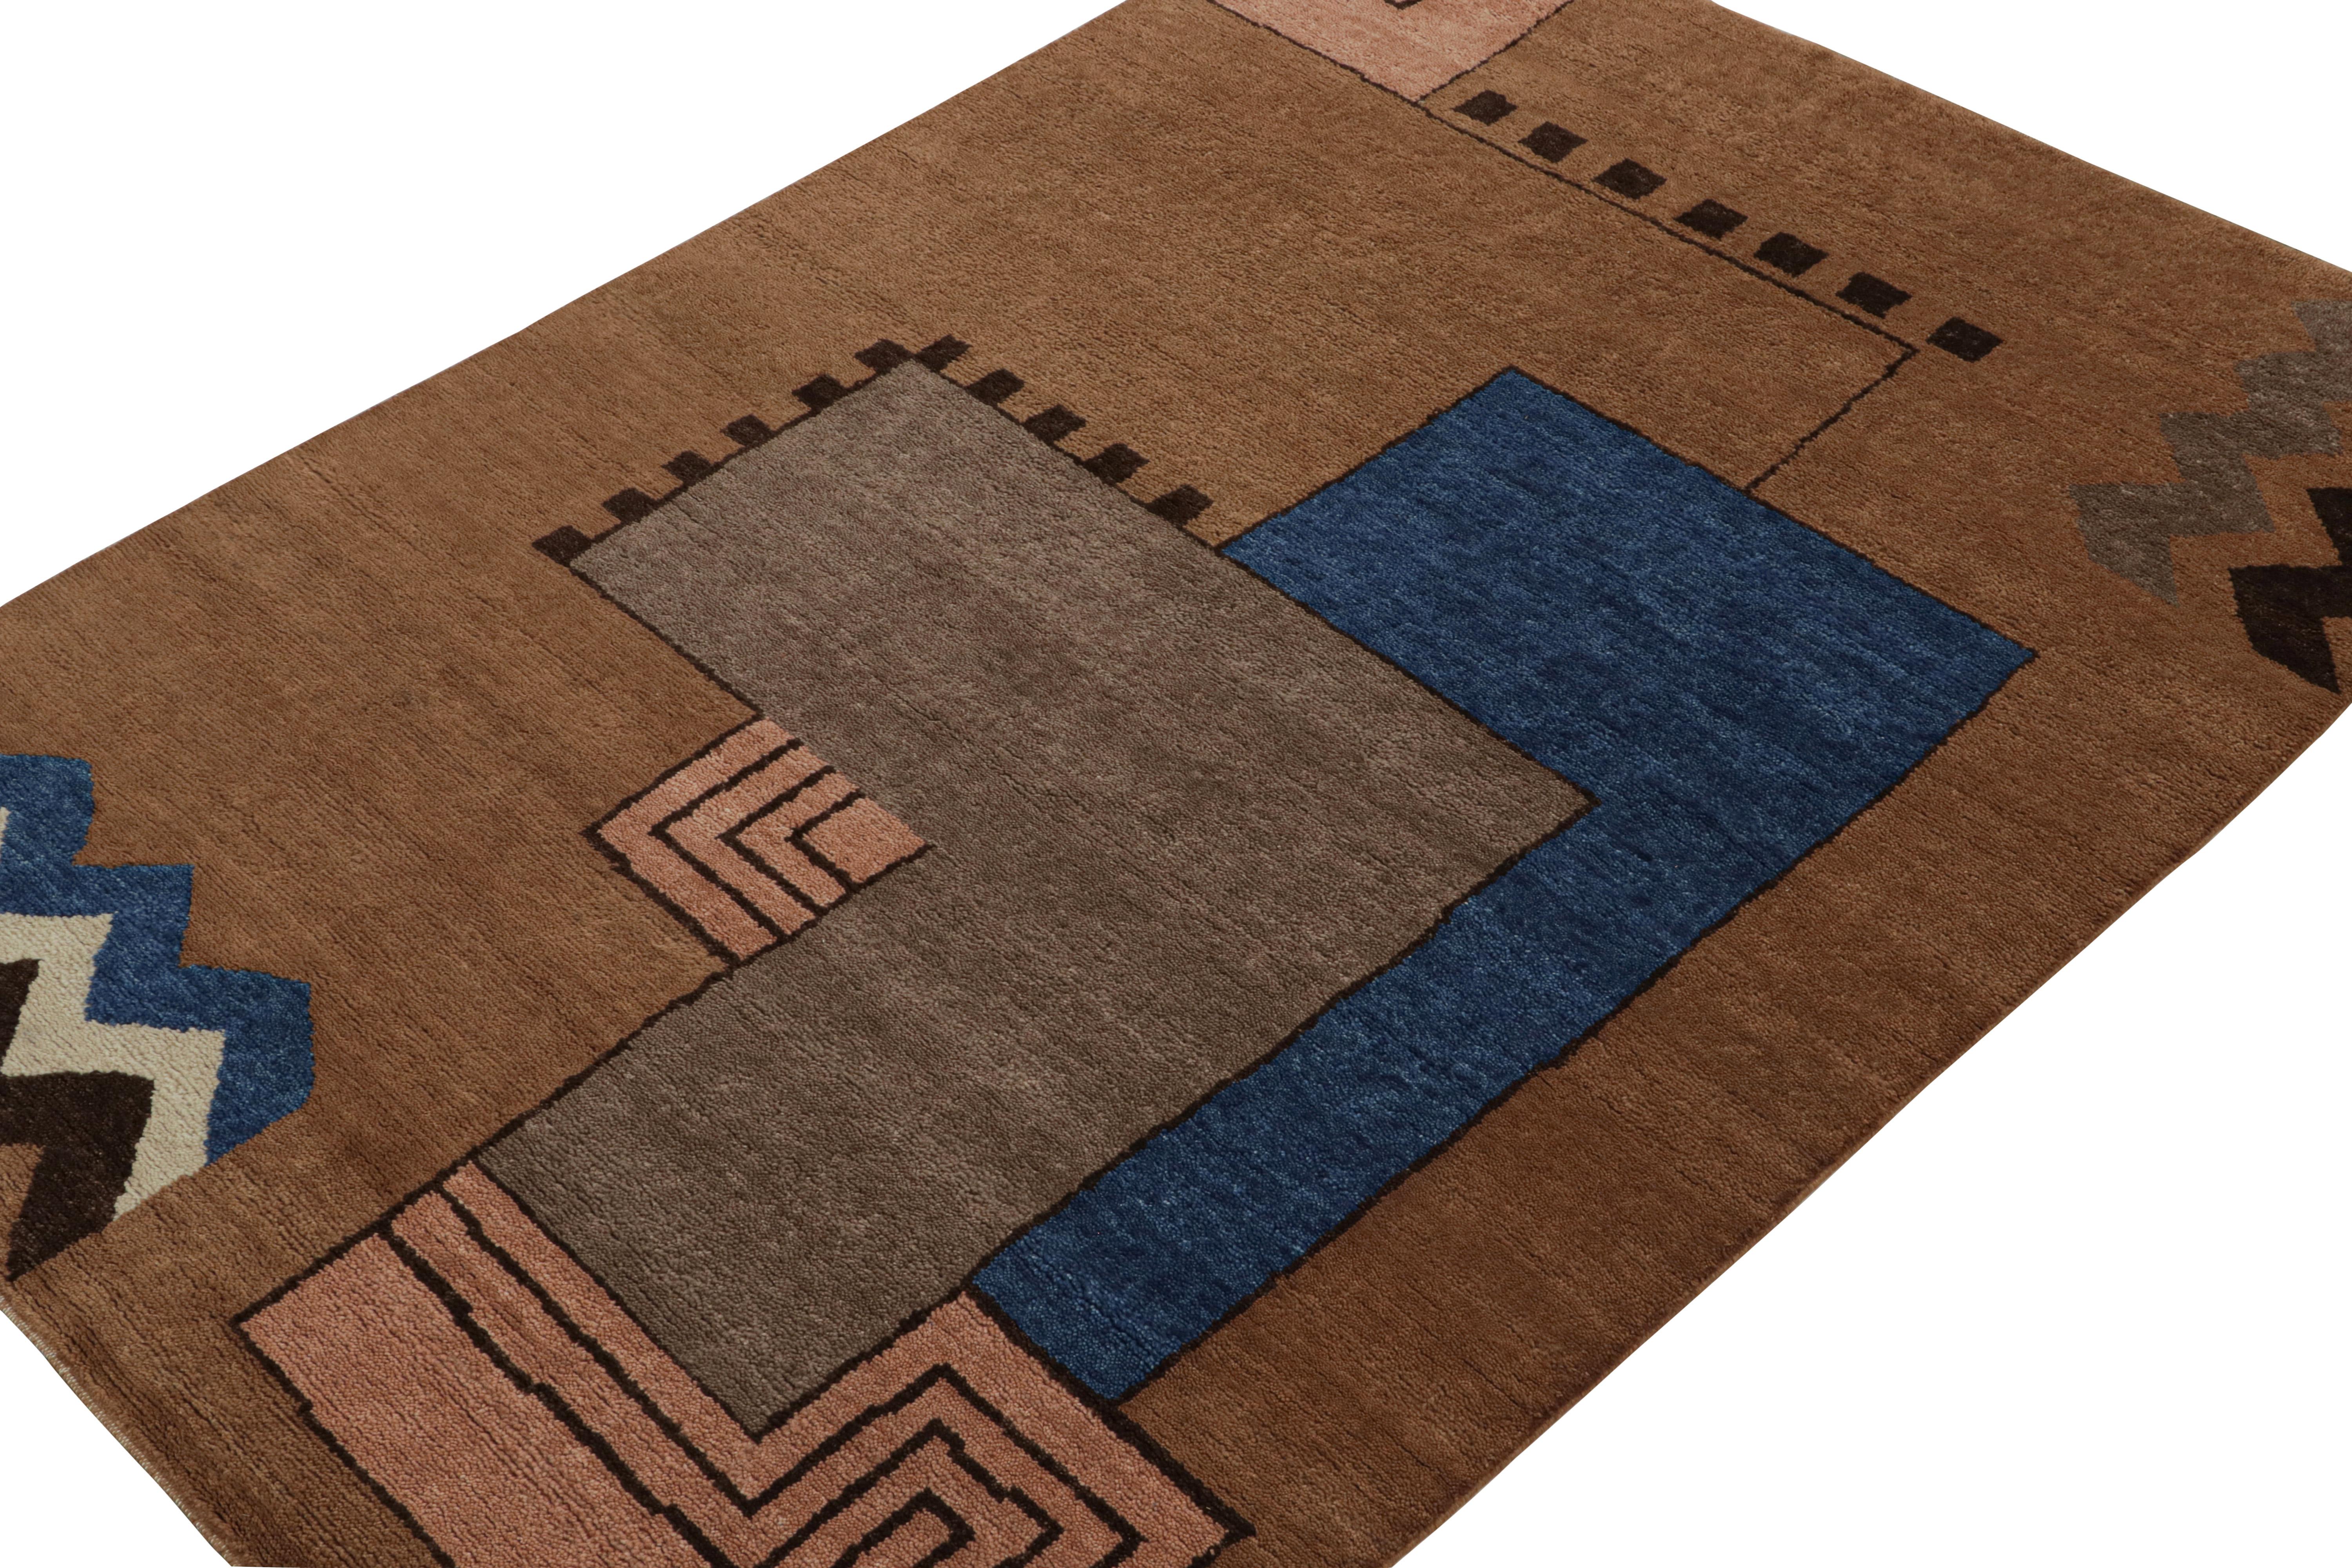 Hand-knotted in wool, this 6x9 modern rug represents the French Art Deco rug collection by Rug & Kilim.

On the Design: 

This particular piece is inspired by Cubist Art Deco style rugs of the 1920s European sensibility. Its design enjoys